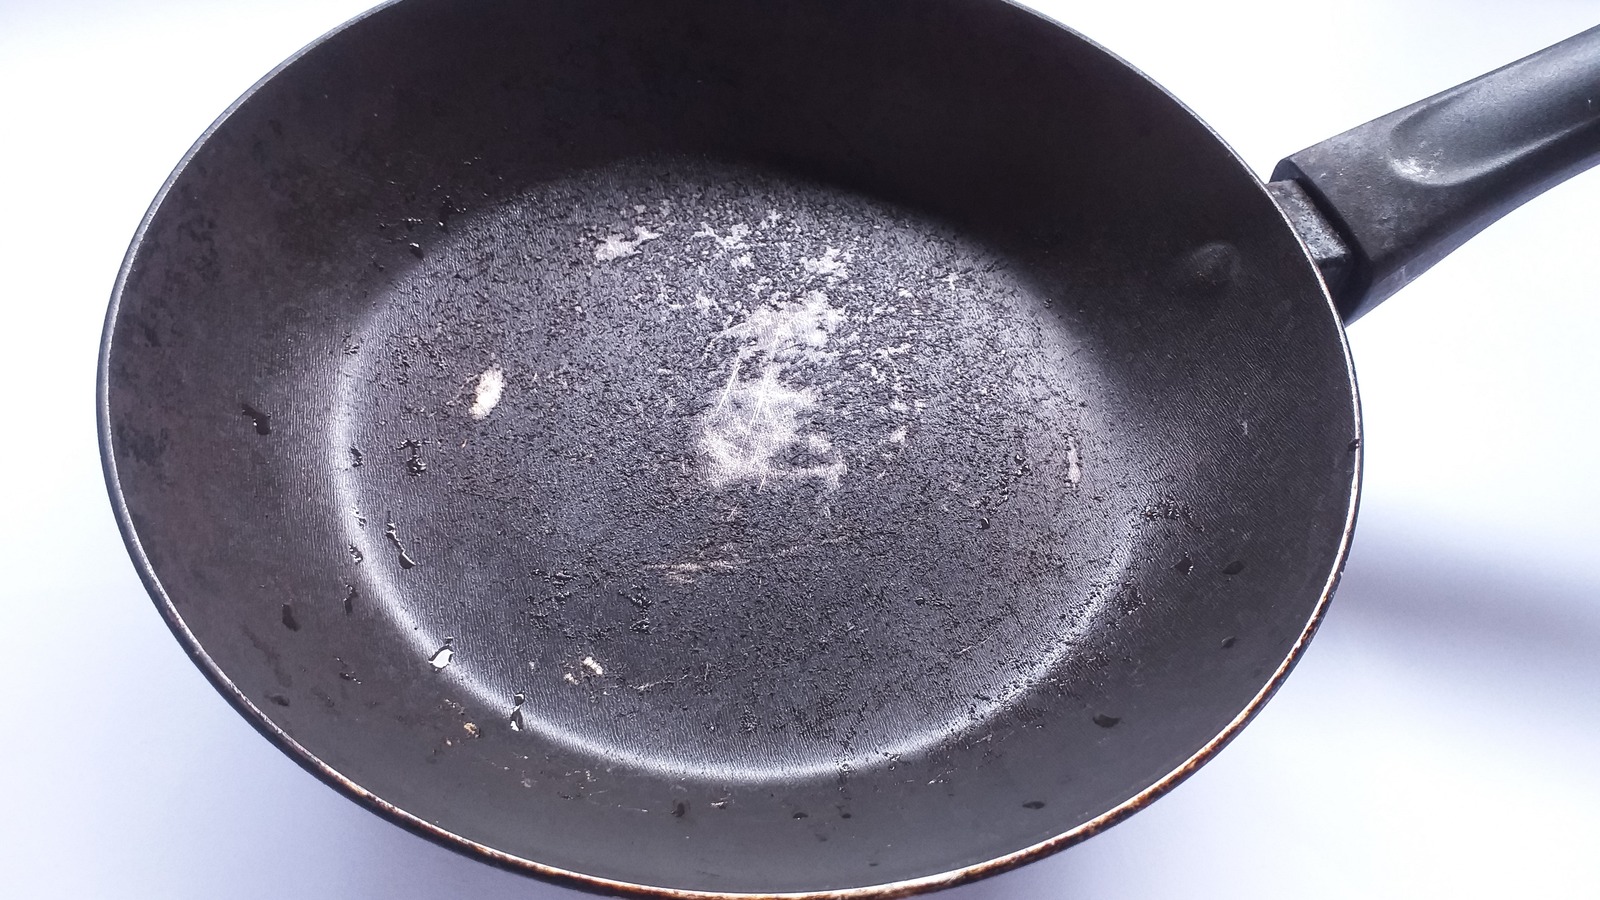 How to Season Nonstick Cookware So It Will Last